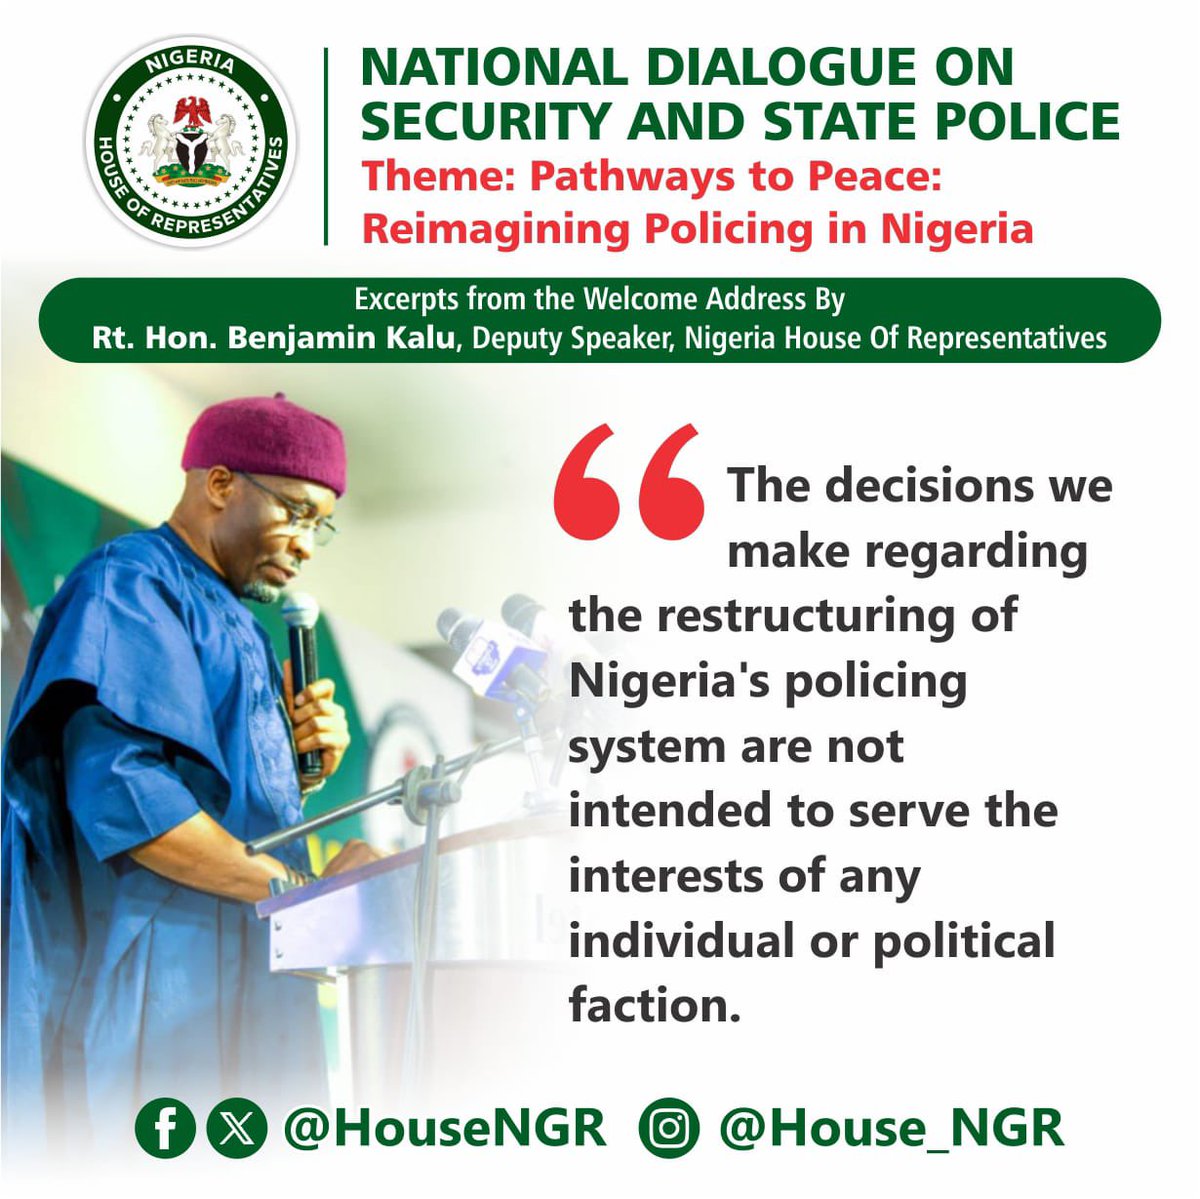 On Monday, the House convened a National Dialogue on Security & State Police with a focus on aggregating citizens' views and perspectives. Deputy Speaker @OfficialBenKalu delivered the welcome address on behalf of the People's House. See excerpts of his remarks at the Dialogue